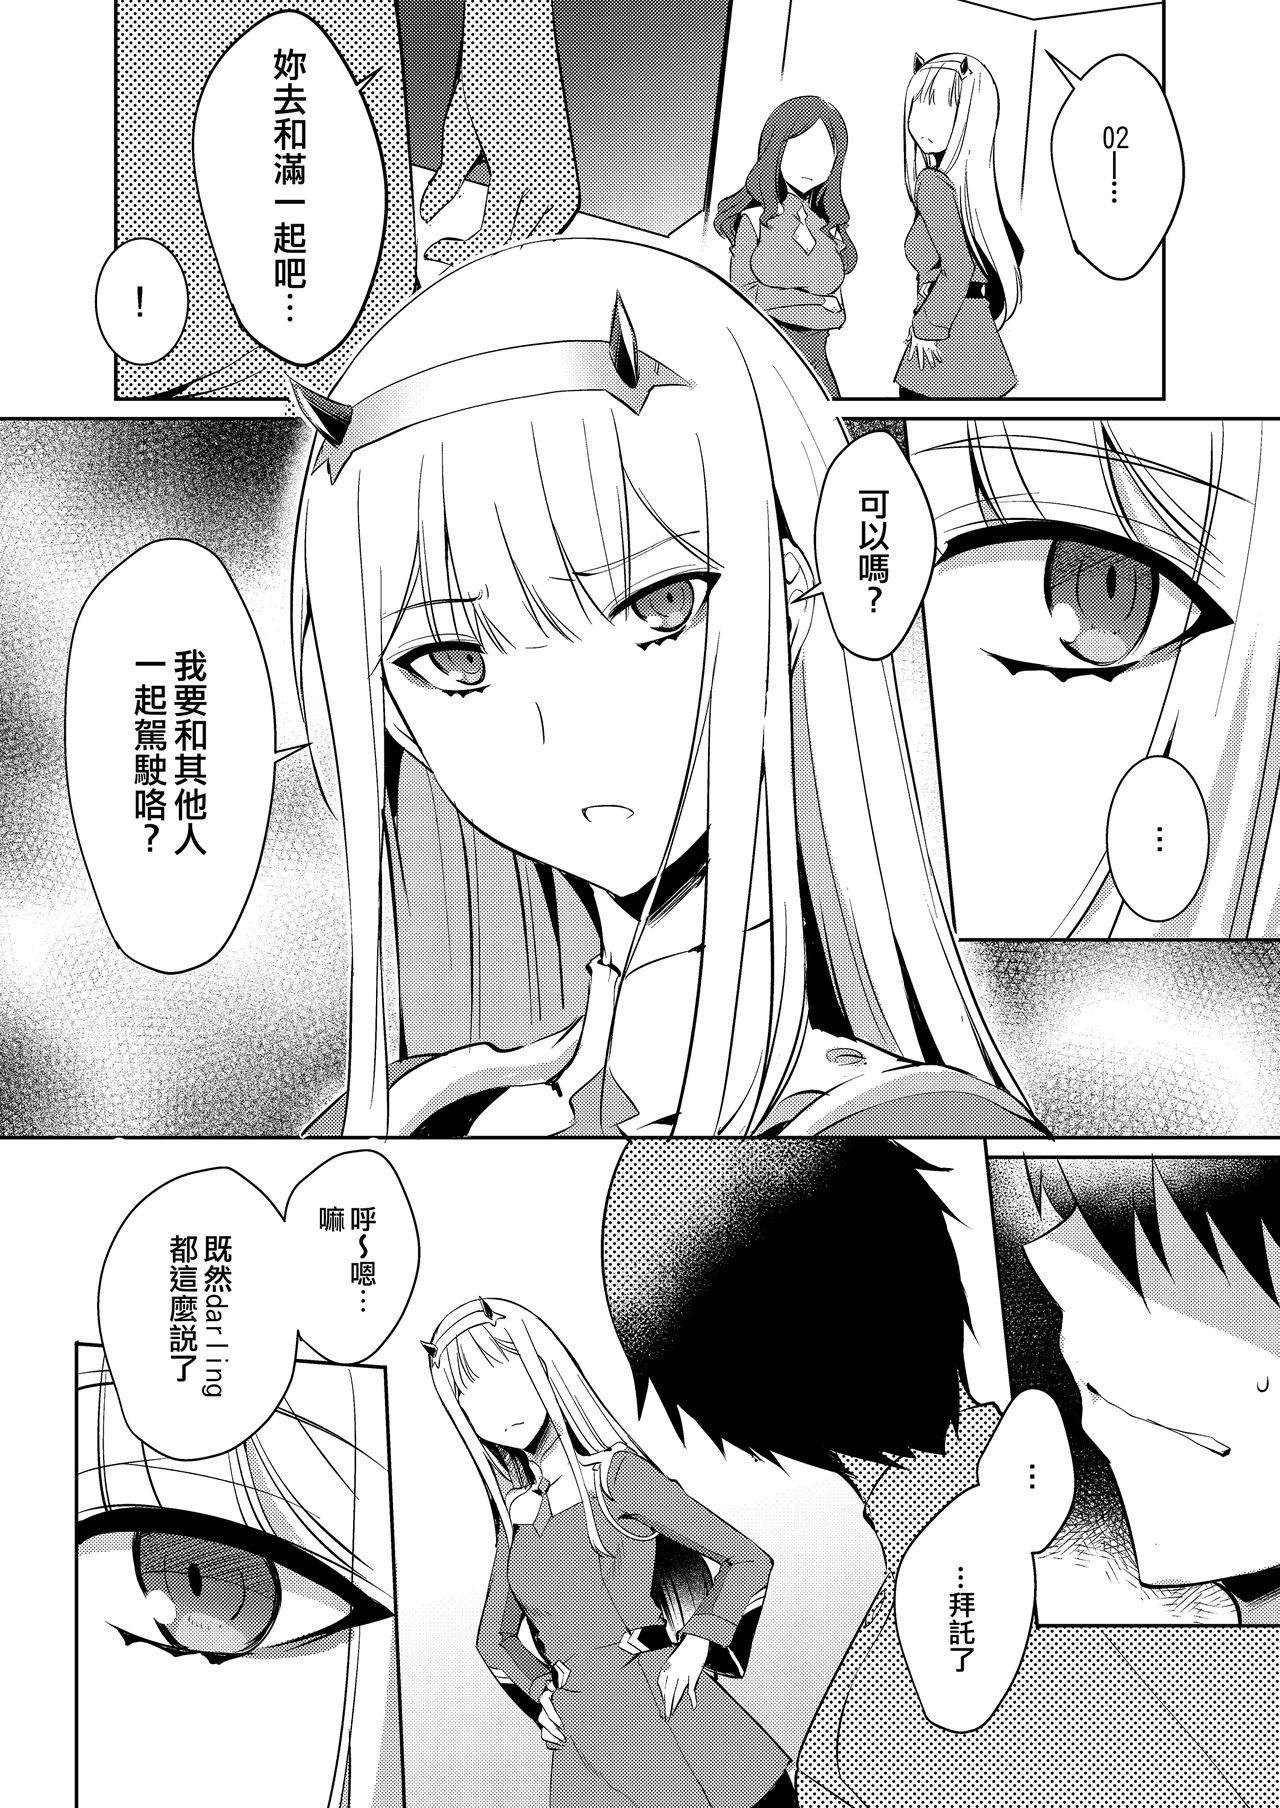 Dick Suckers Mitsuru in the Zero Two - Darling in the franxx Amateur Sex Tapes - Page 5